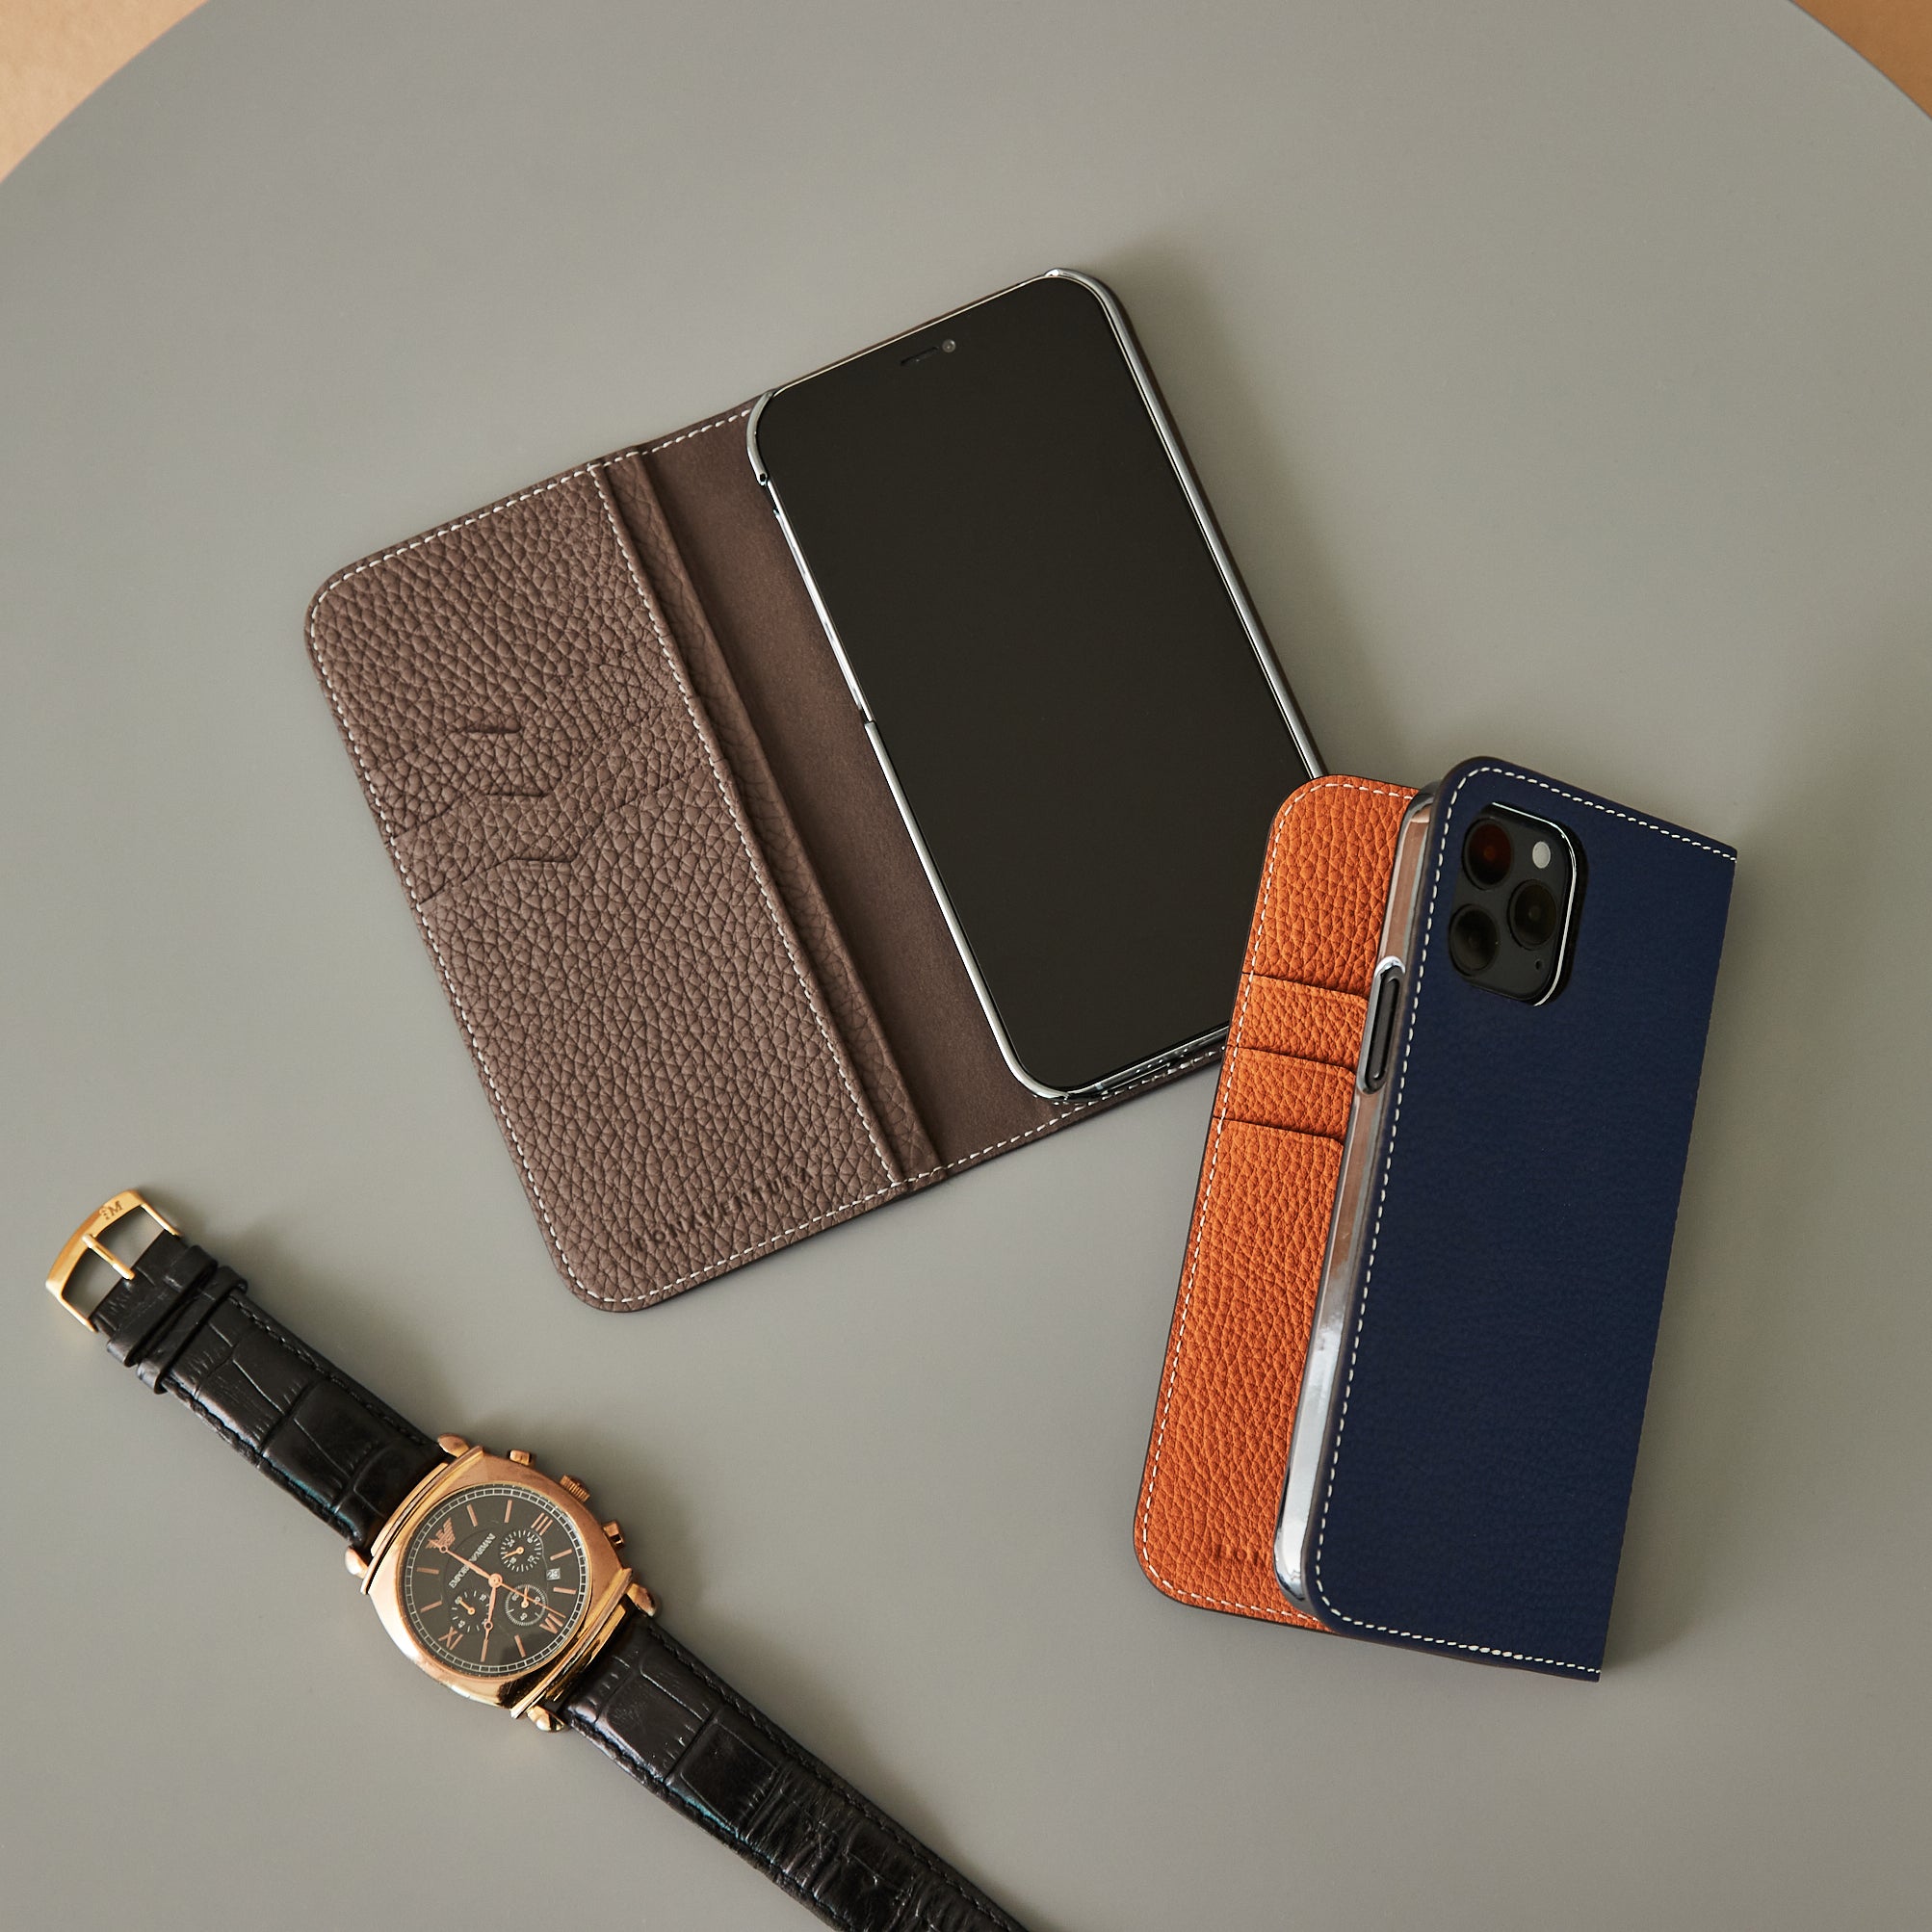 Stylish iPhone leather cases in trendy colors for everyday life and office in 2023. 